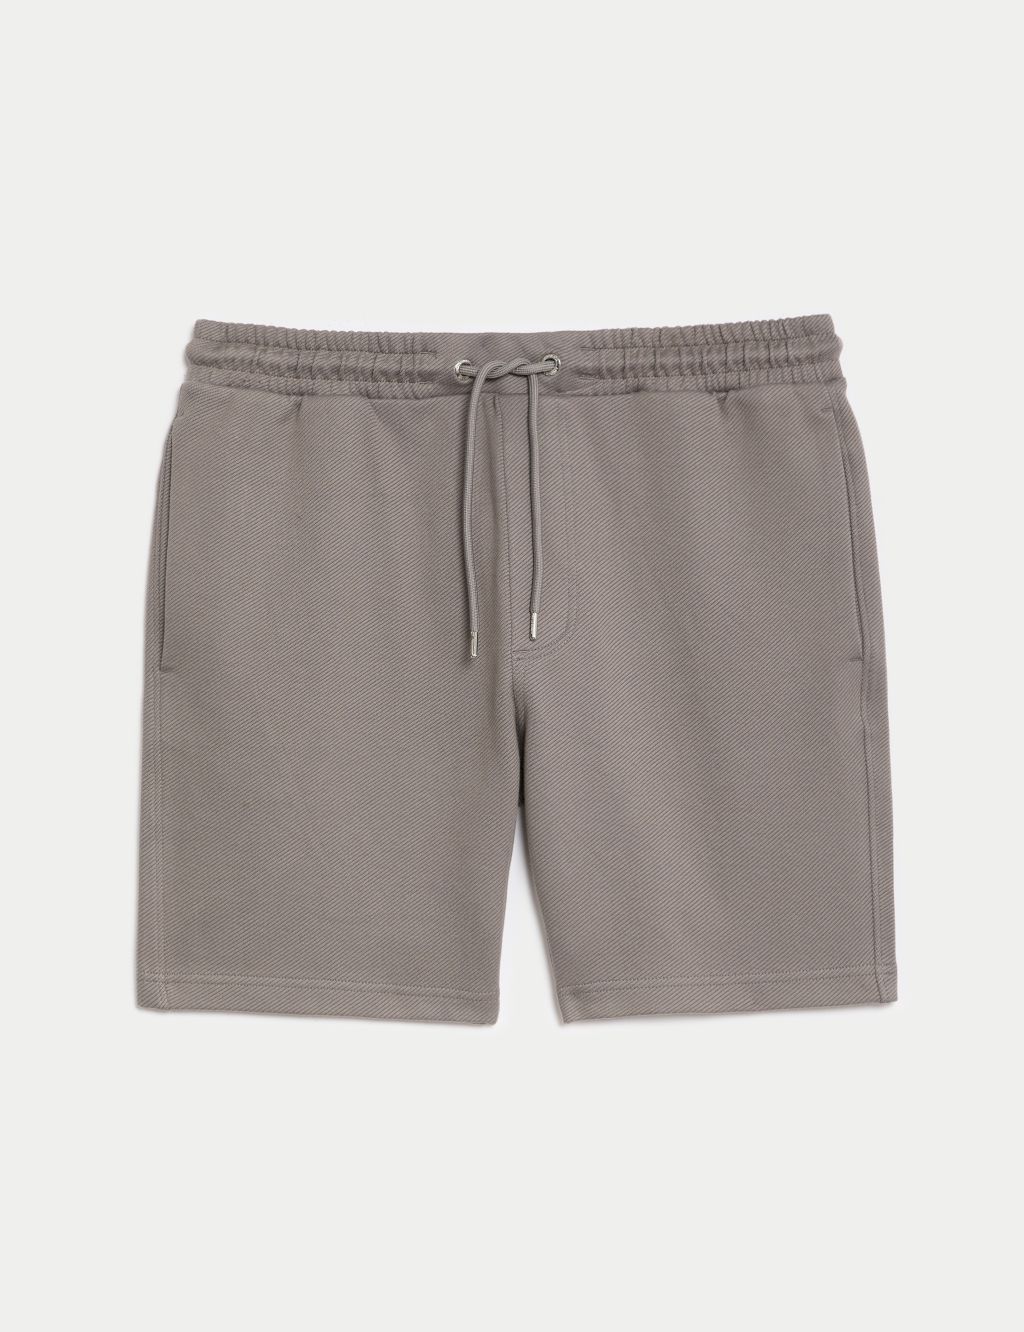 Jersey Textured Shorts image 1